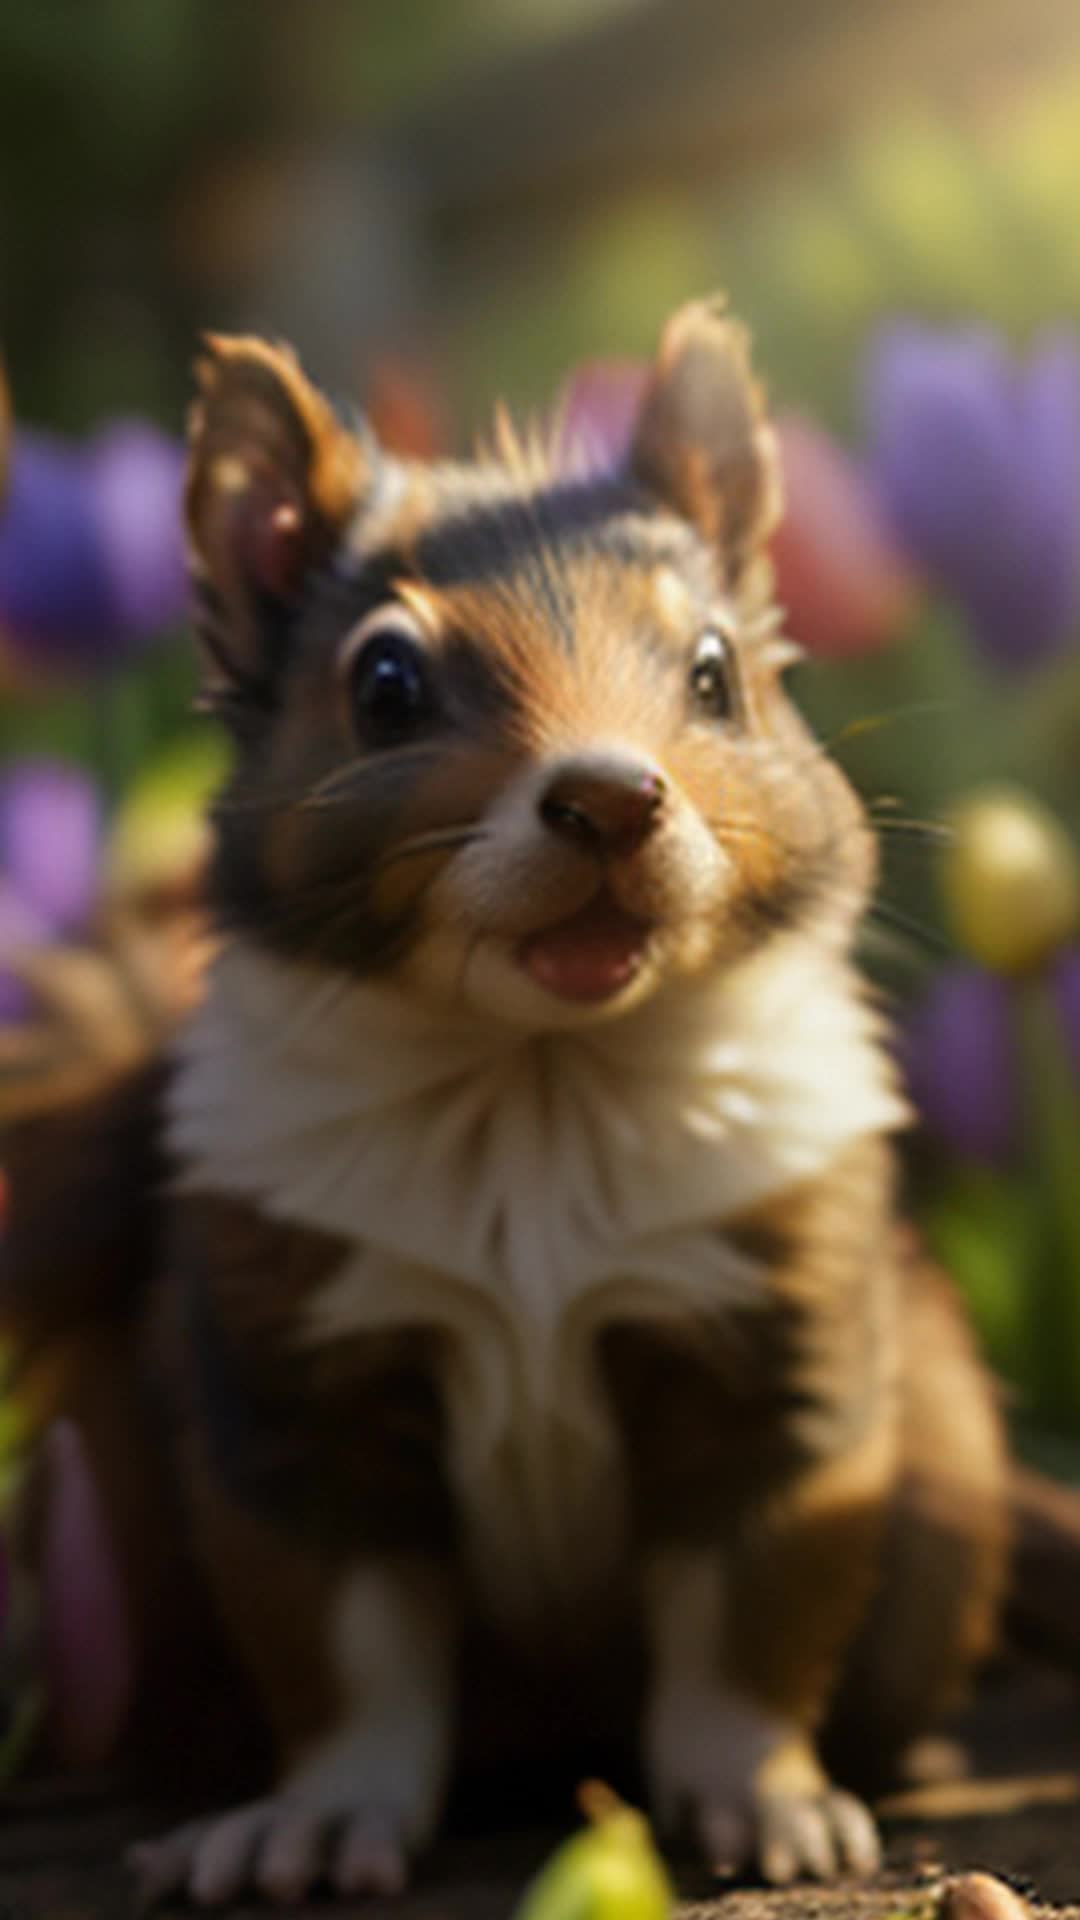 Mischievous puppy, vibrant tulip fields, Netherlands, dew-kissed petals, small paws, butterflies stirred, playful darting, curious squirrel joining, frolic action, rainbow tulips, friendly hedgehog, playfully nudging, new friendship, floral paradise, highly detailed, sharp focus, soft shadows